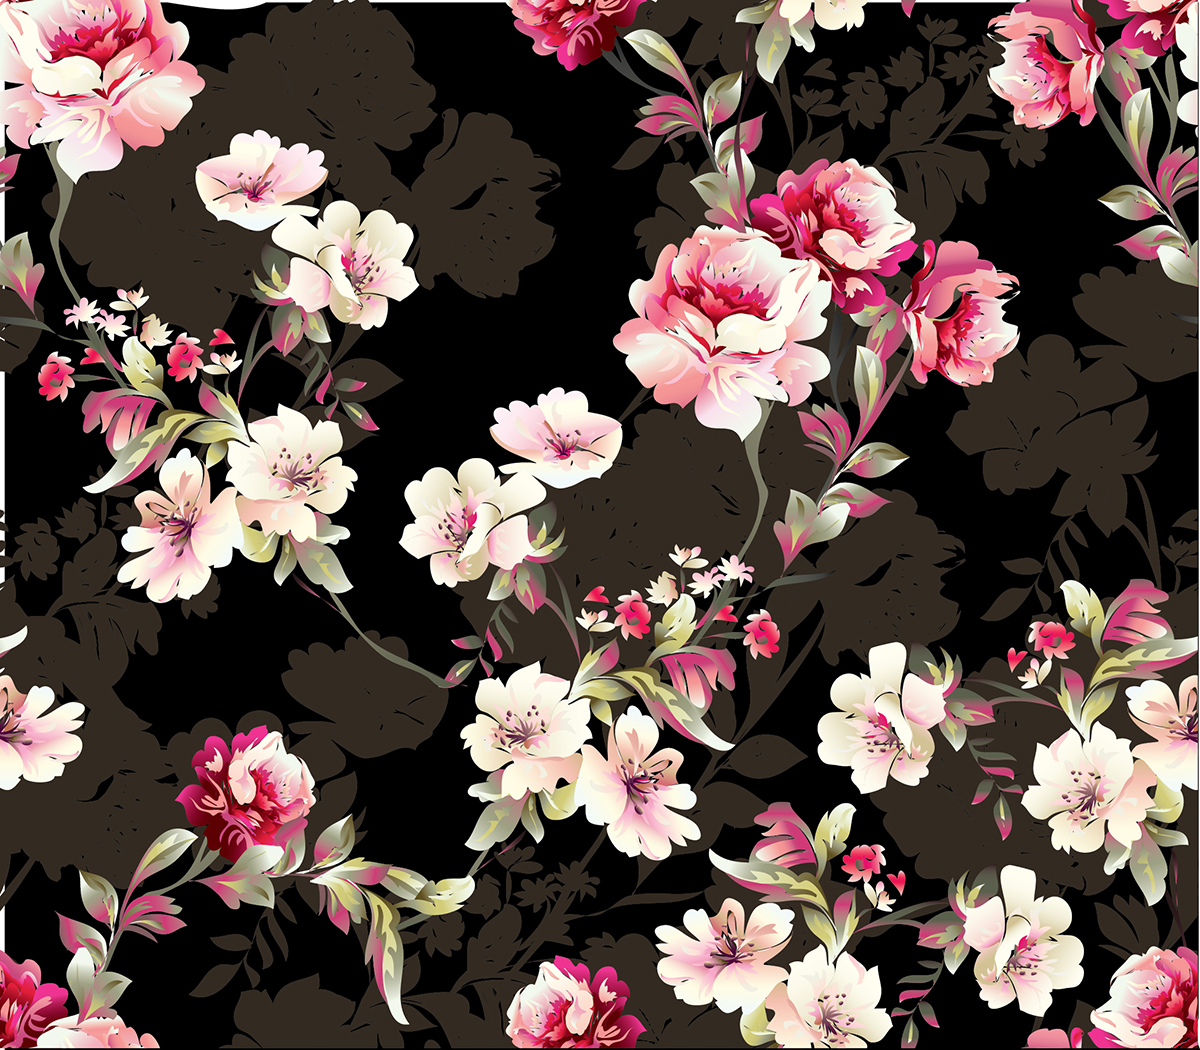 A floral pattern on a black background